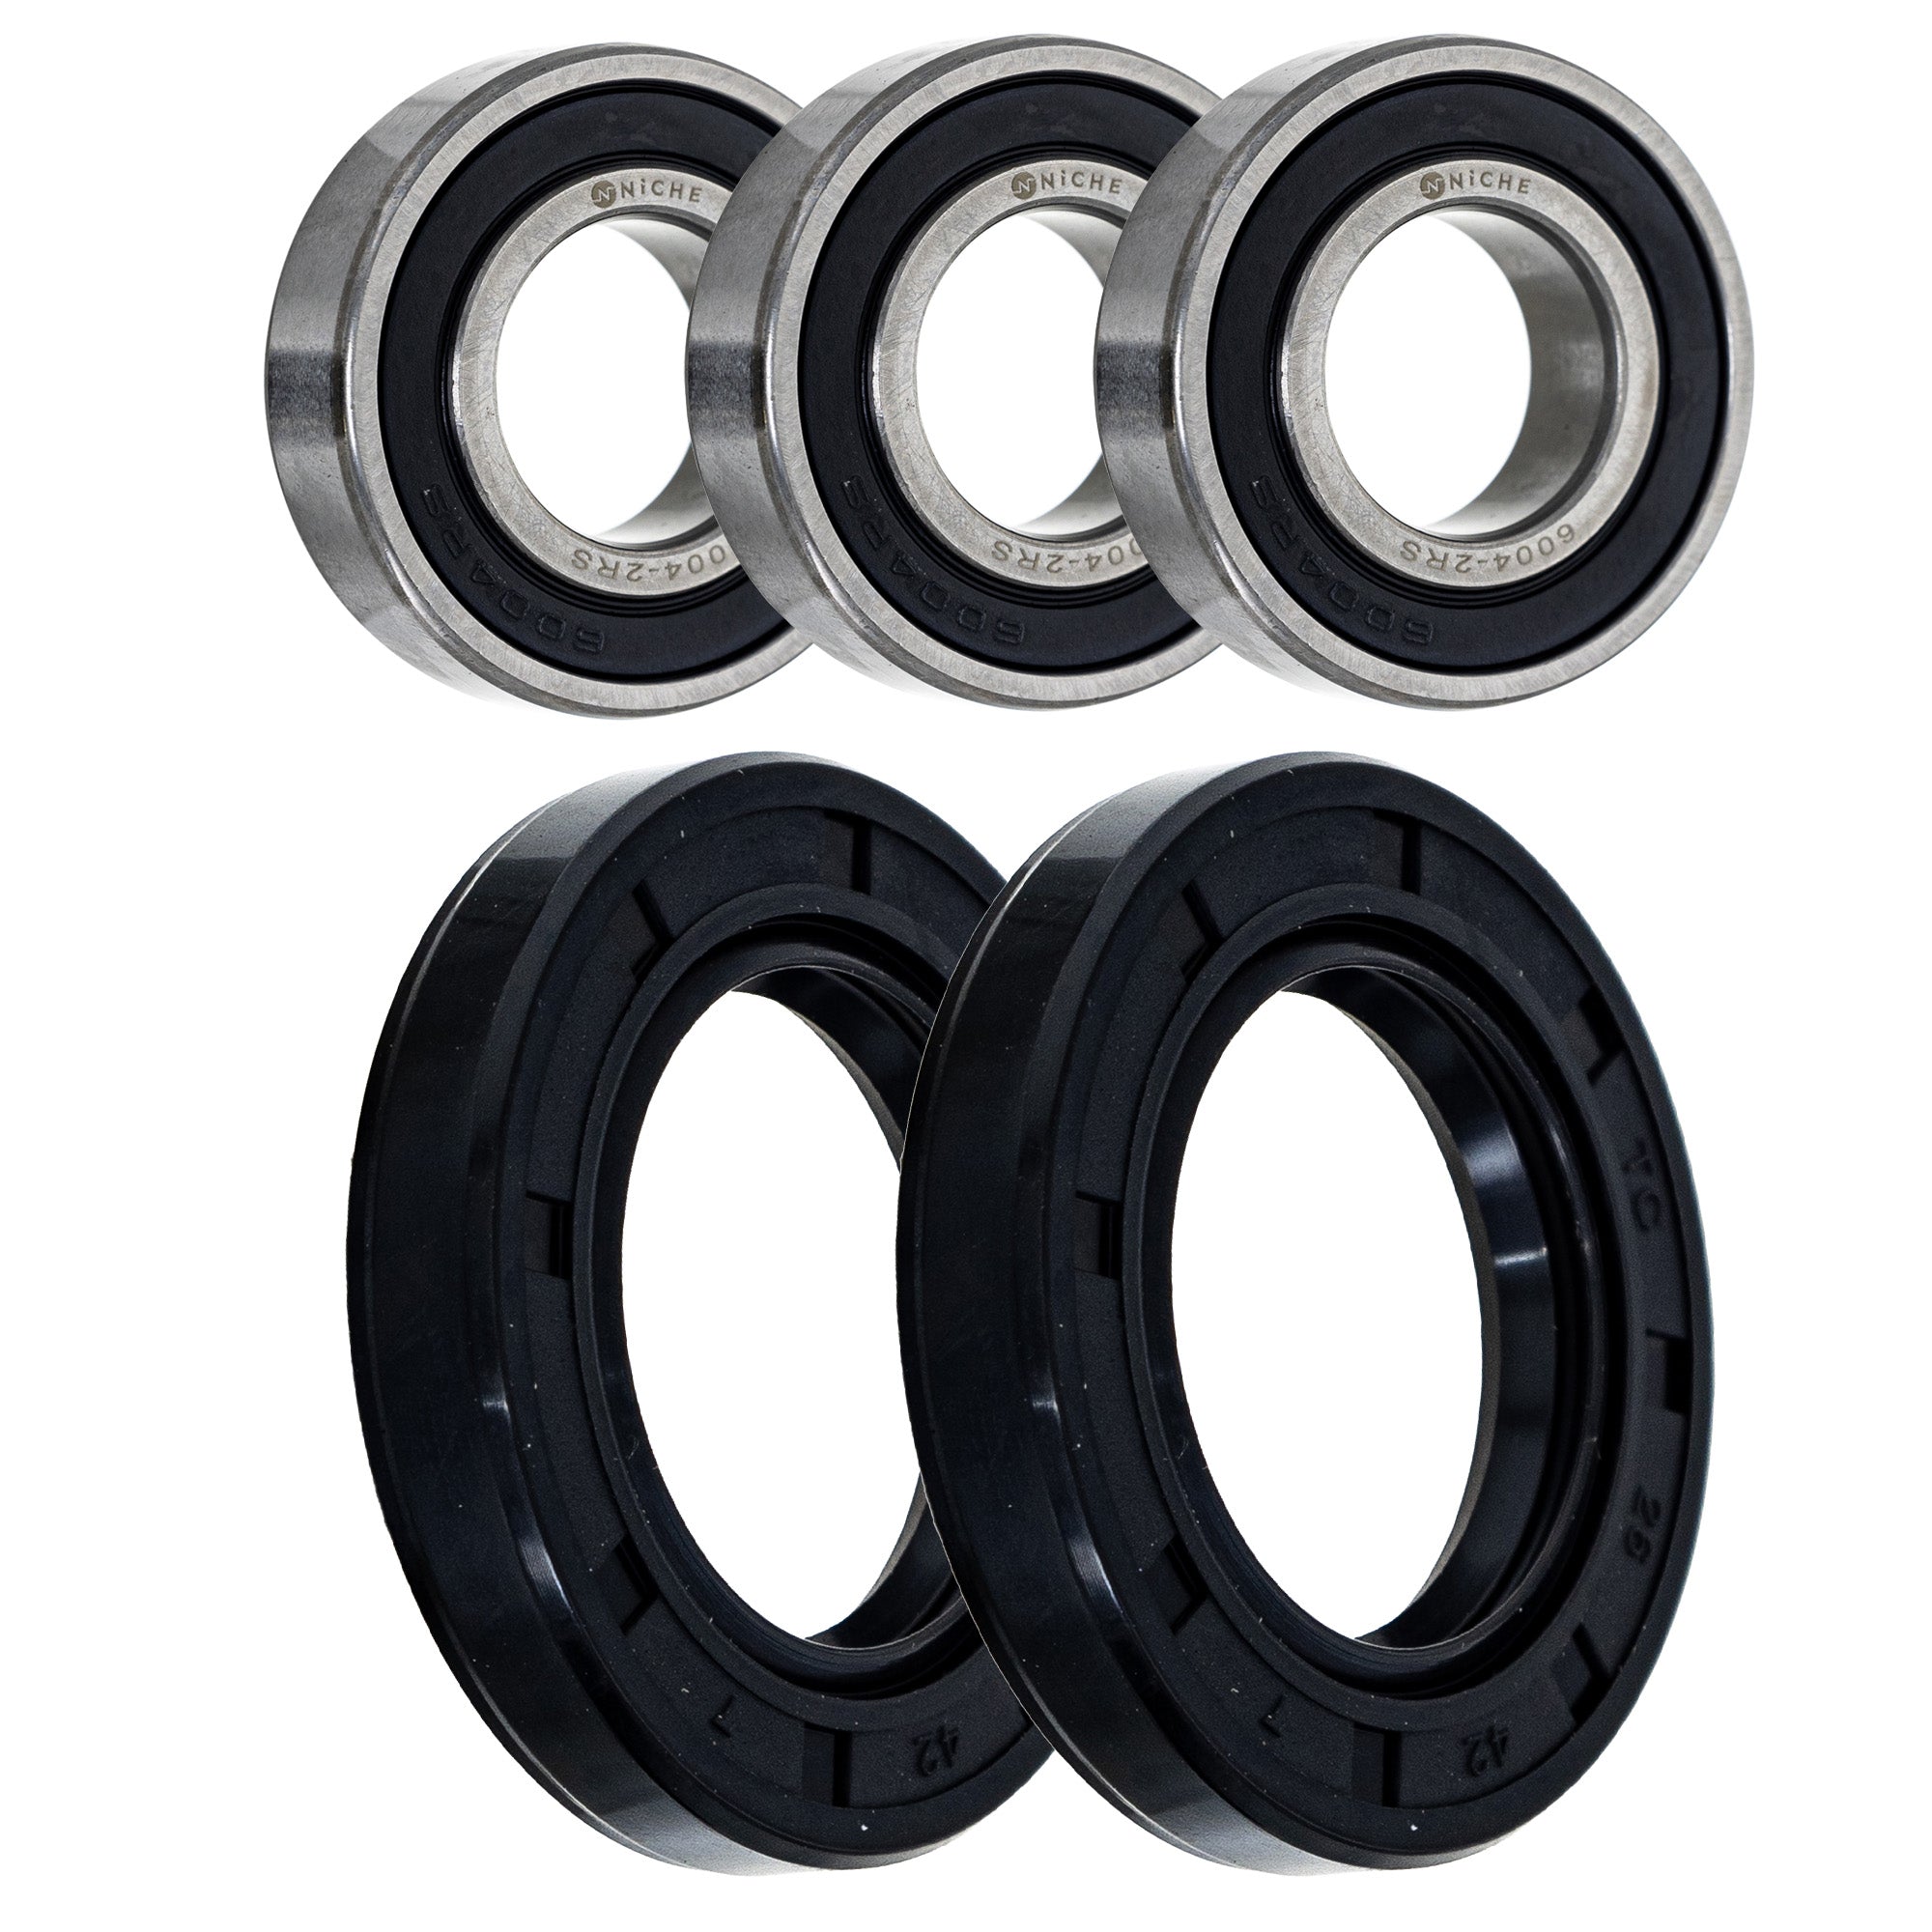 Wheel Bearing Seal Kit for zOTHER Ref No RM250 RM125 NICHE MK1009129